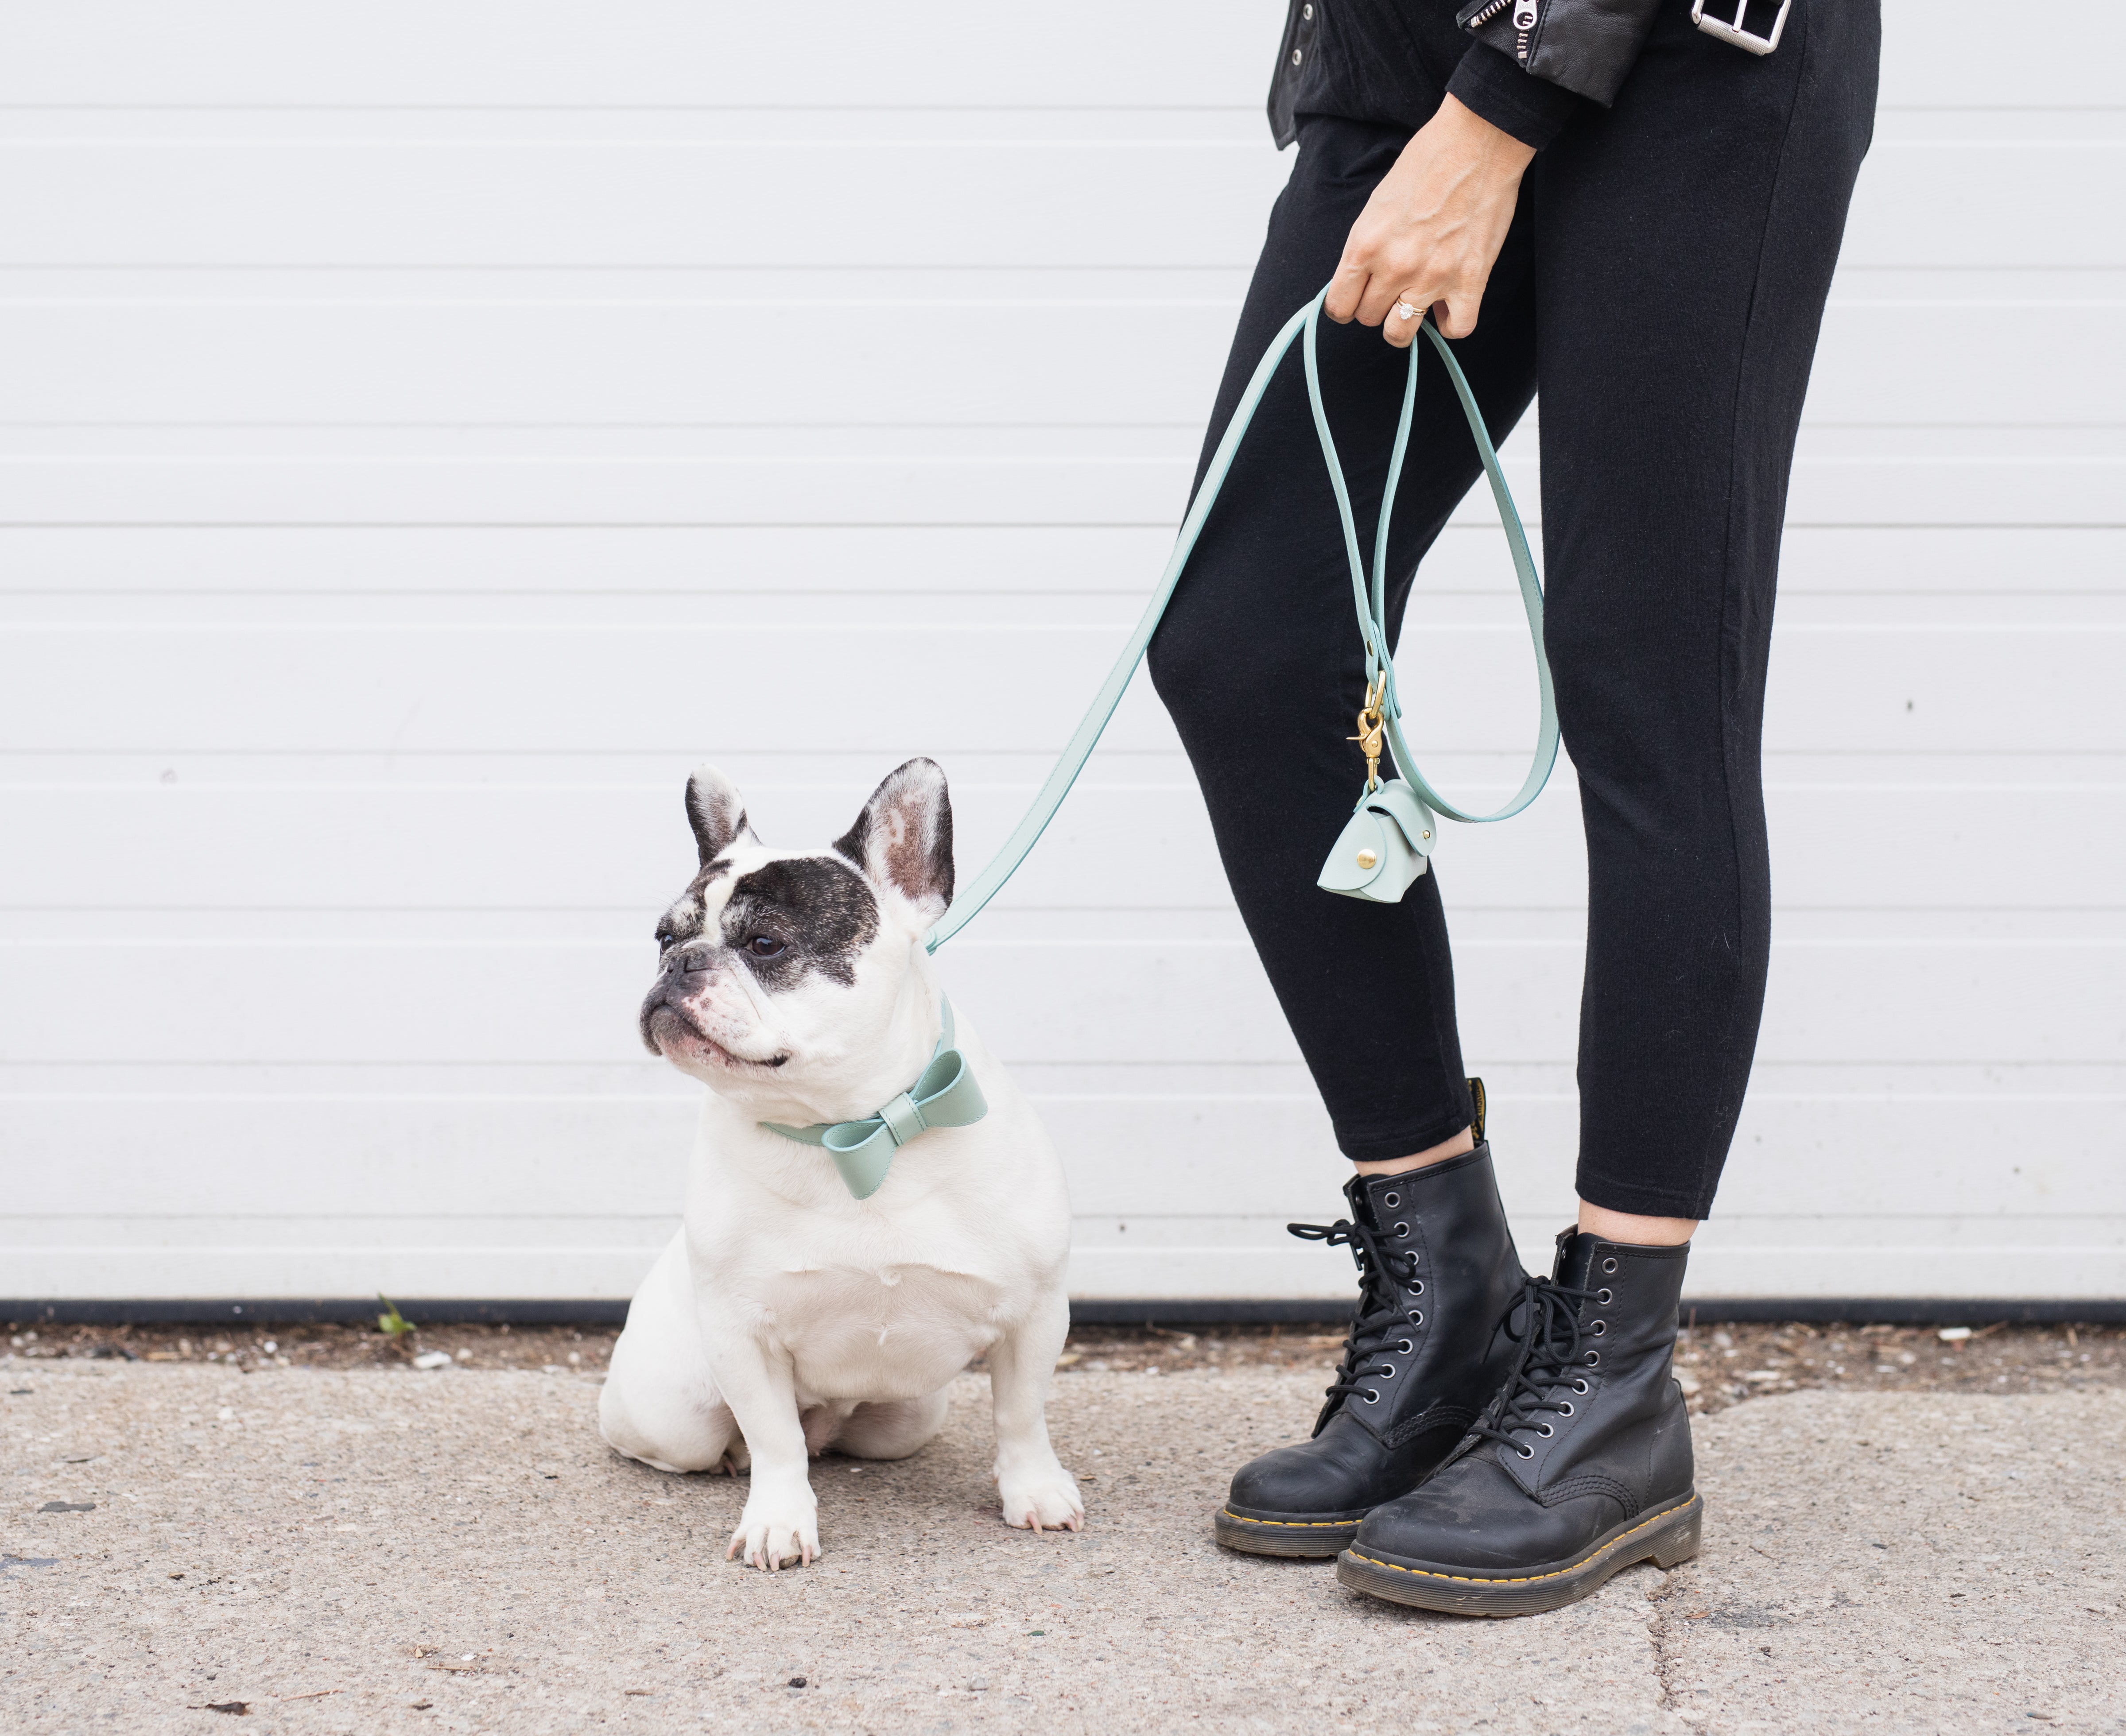 Mint leather collar with removable bow